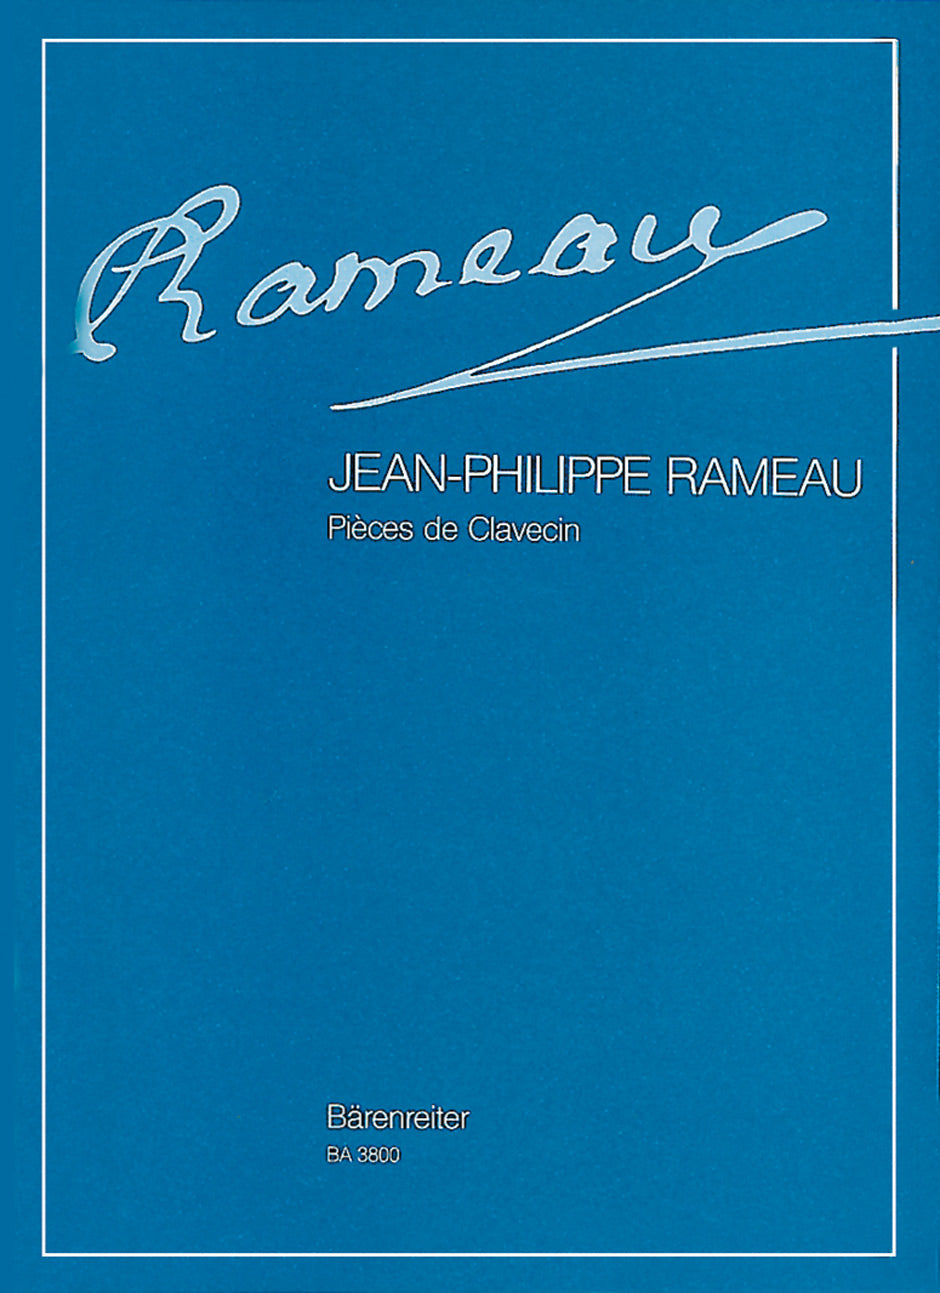 Rameau Pieces de Clavecin -Complete Edition. With the composer's original appended texts unabridged, directions for playing and ornamentation tables-